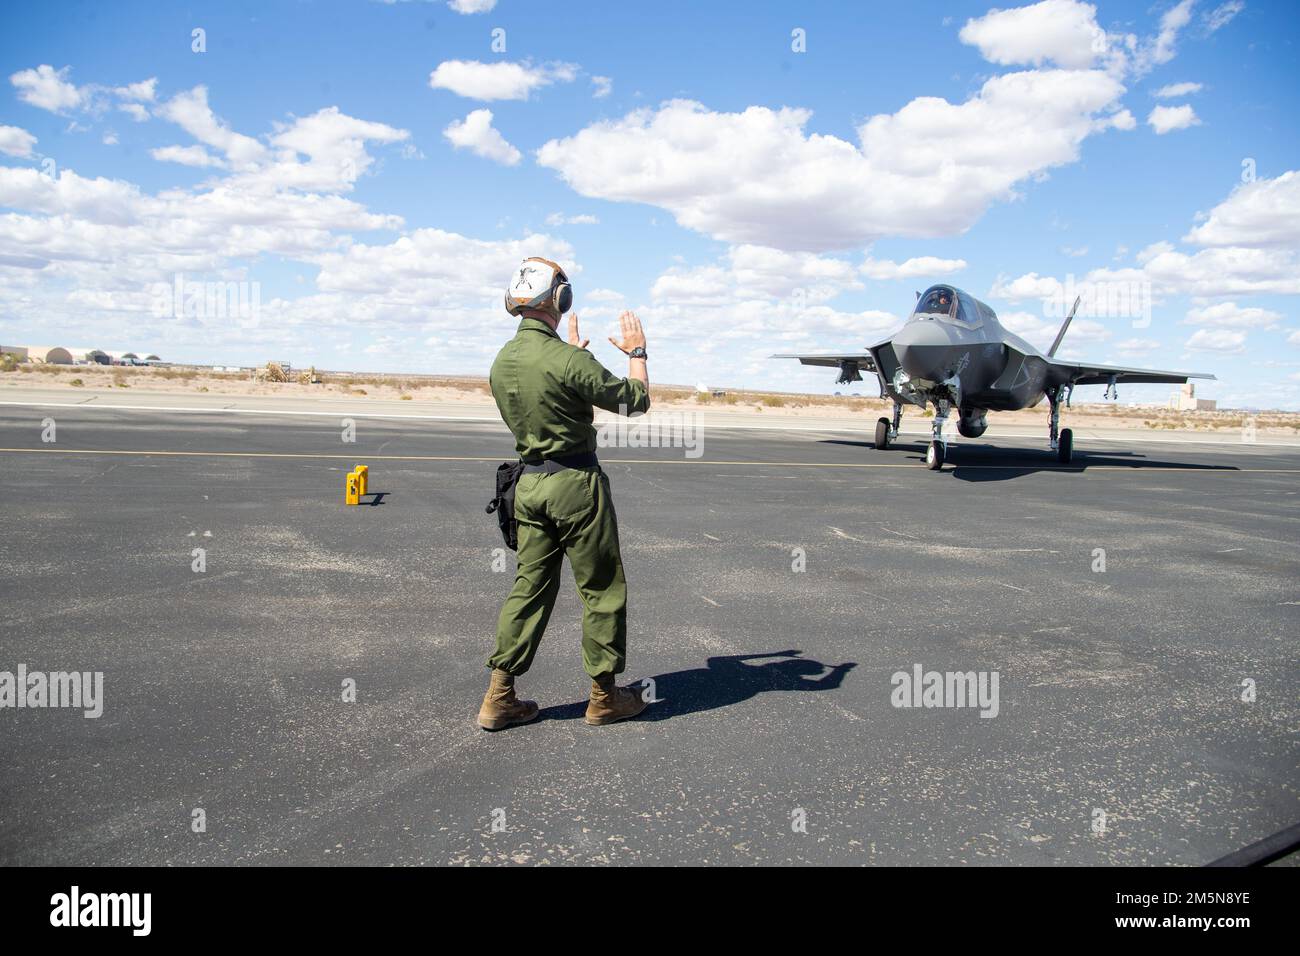 A U.S. Marine Corps F-35B Lightning II assigned to Marine Aviation Weapons and Tactics Squadron One (MAWTS-1), taxis prior to a ground refueling during Weapons and Tactics Instructor (WTI) course 2-22, at Laguna Army Airfield, Yuma, Arizona, March 29, 2022. WTI is a seven-week training event hosted by MAWTS-1, providing standardized advanced tactical training and certification of unit instructor qualifications to support Marine aviation training and readiness, and assists in developing and employing aviation weapons and tactics. Stock Photo